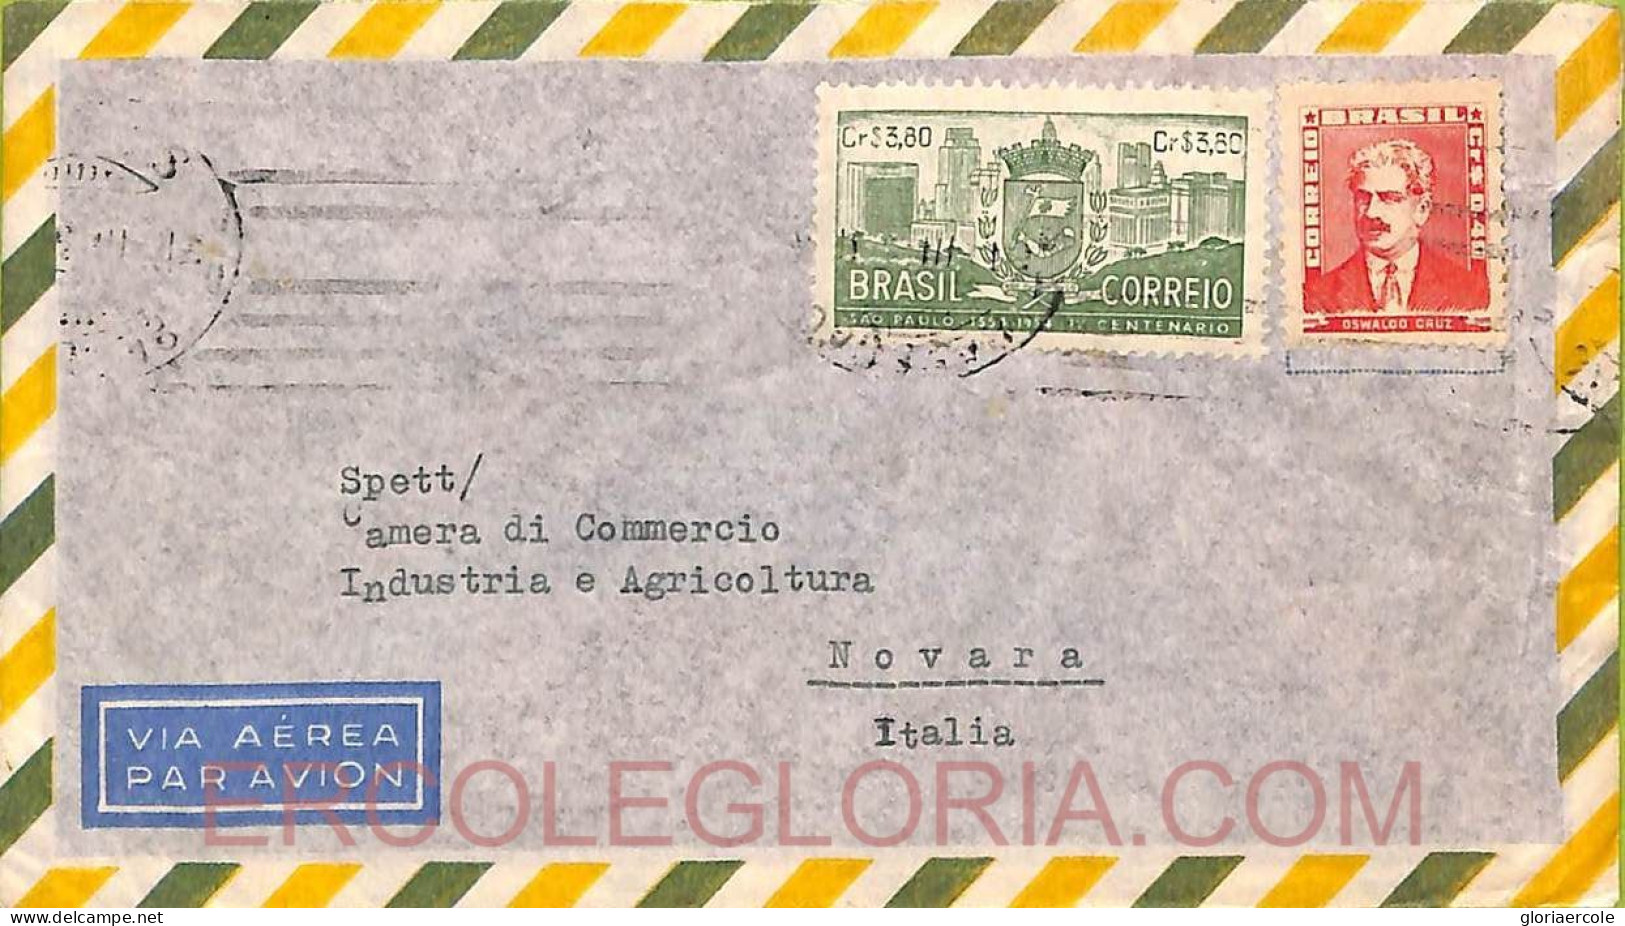 Ad6145  - BRAZIL - POSTAL HISTORY - AIRMAIL COVER  To ITALY  1950's - Covers & Documents